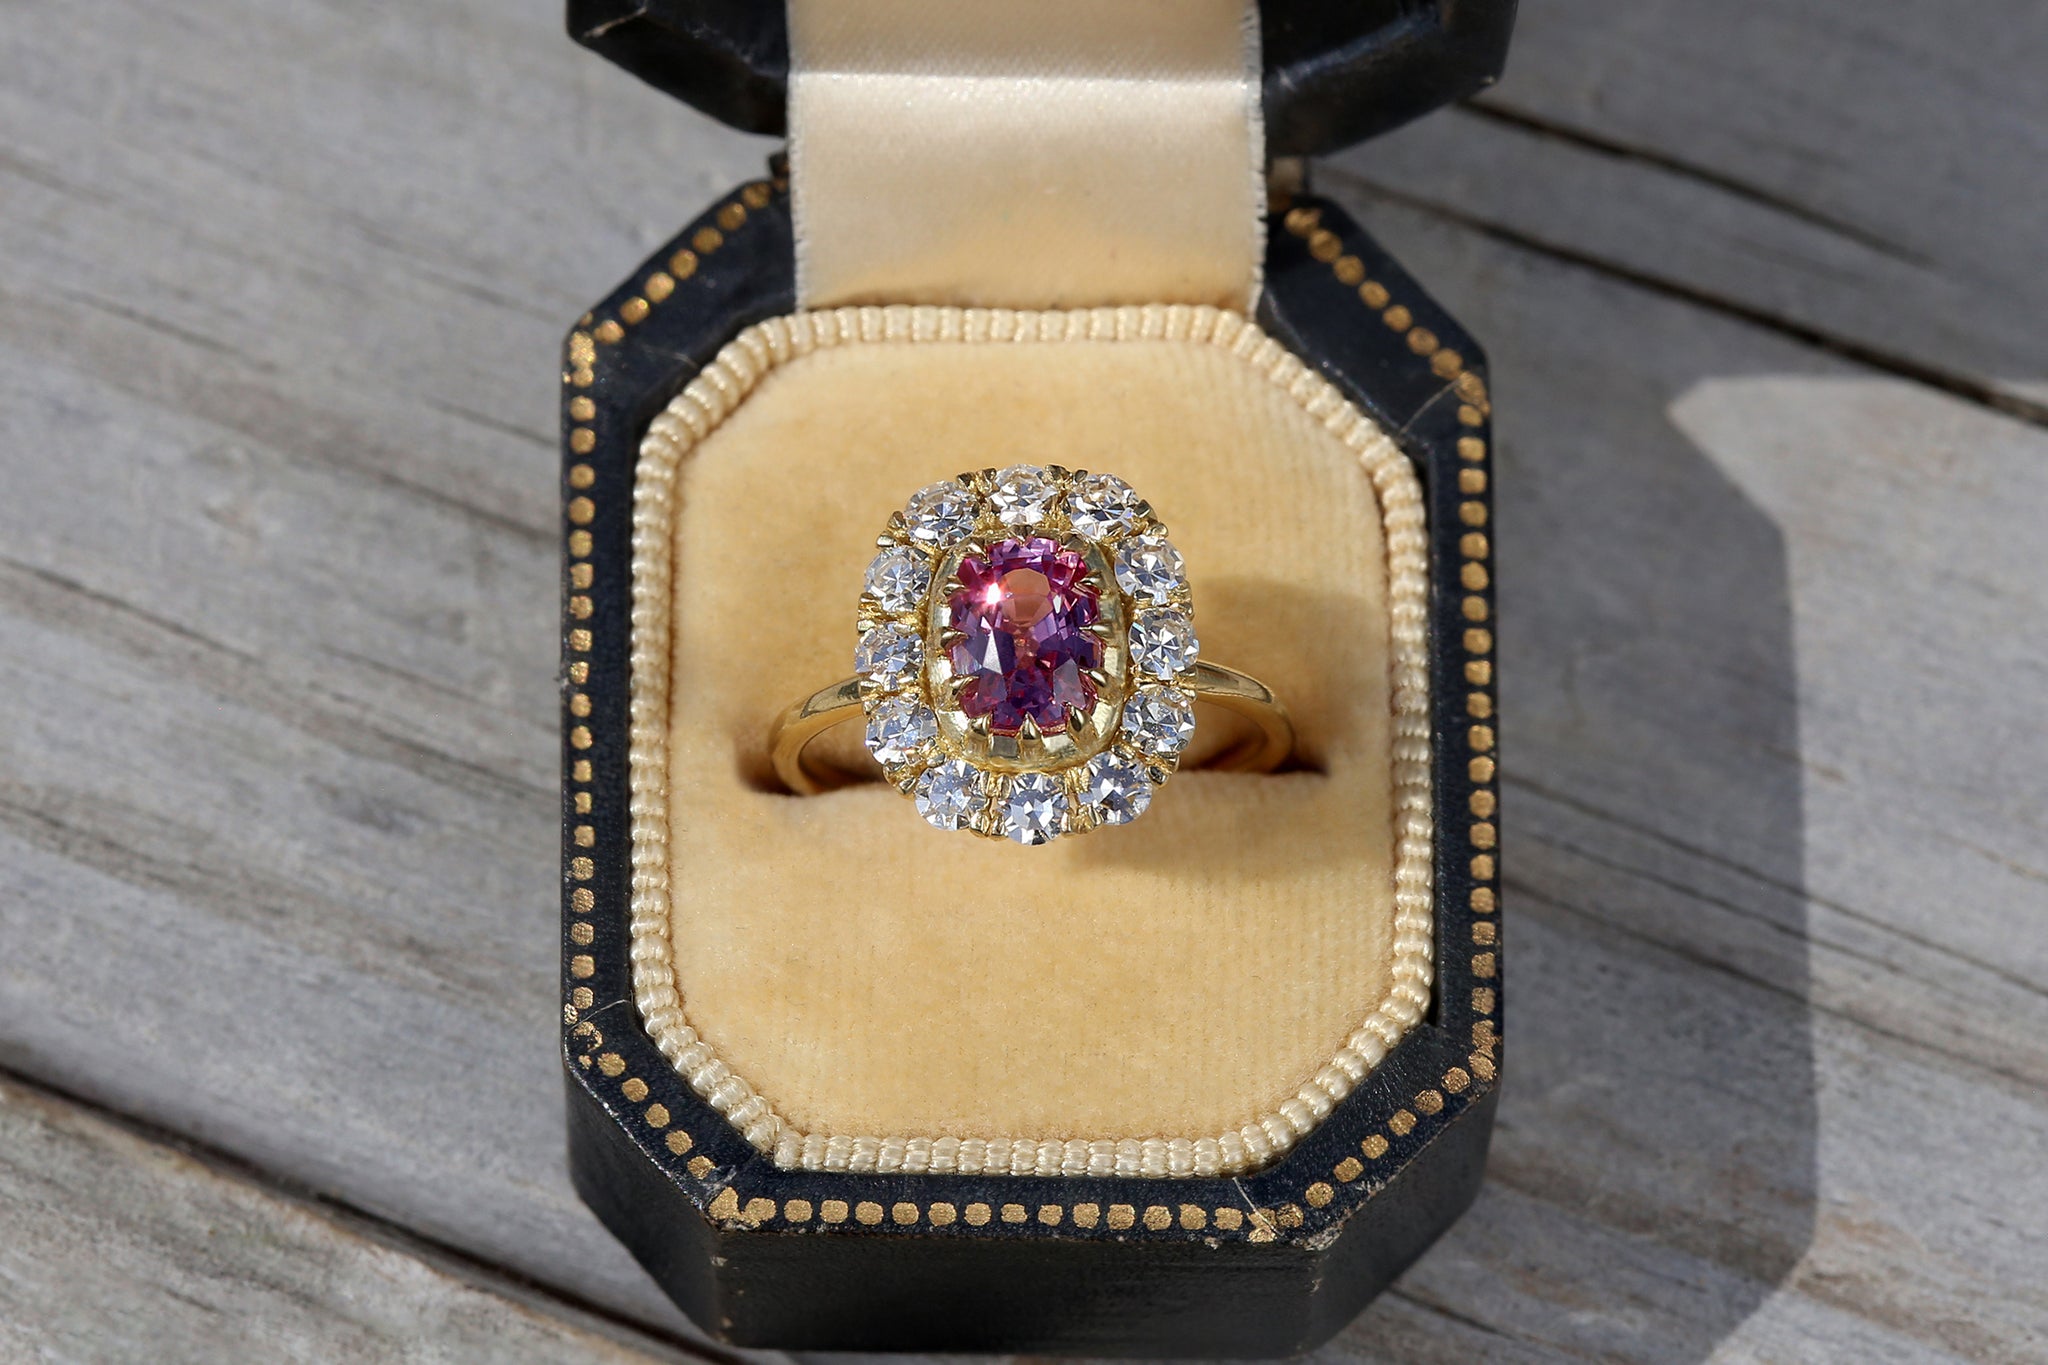 Low-Profile and Stackable Untreated Pink Sapphire Ring - S. Kind & Co